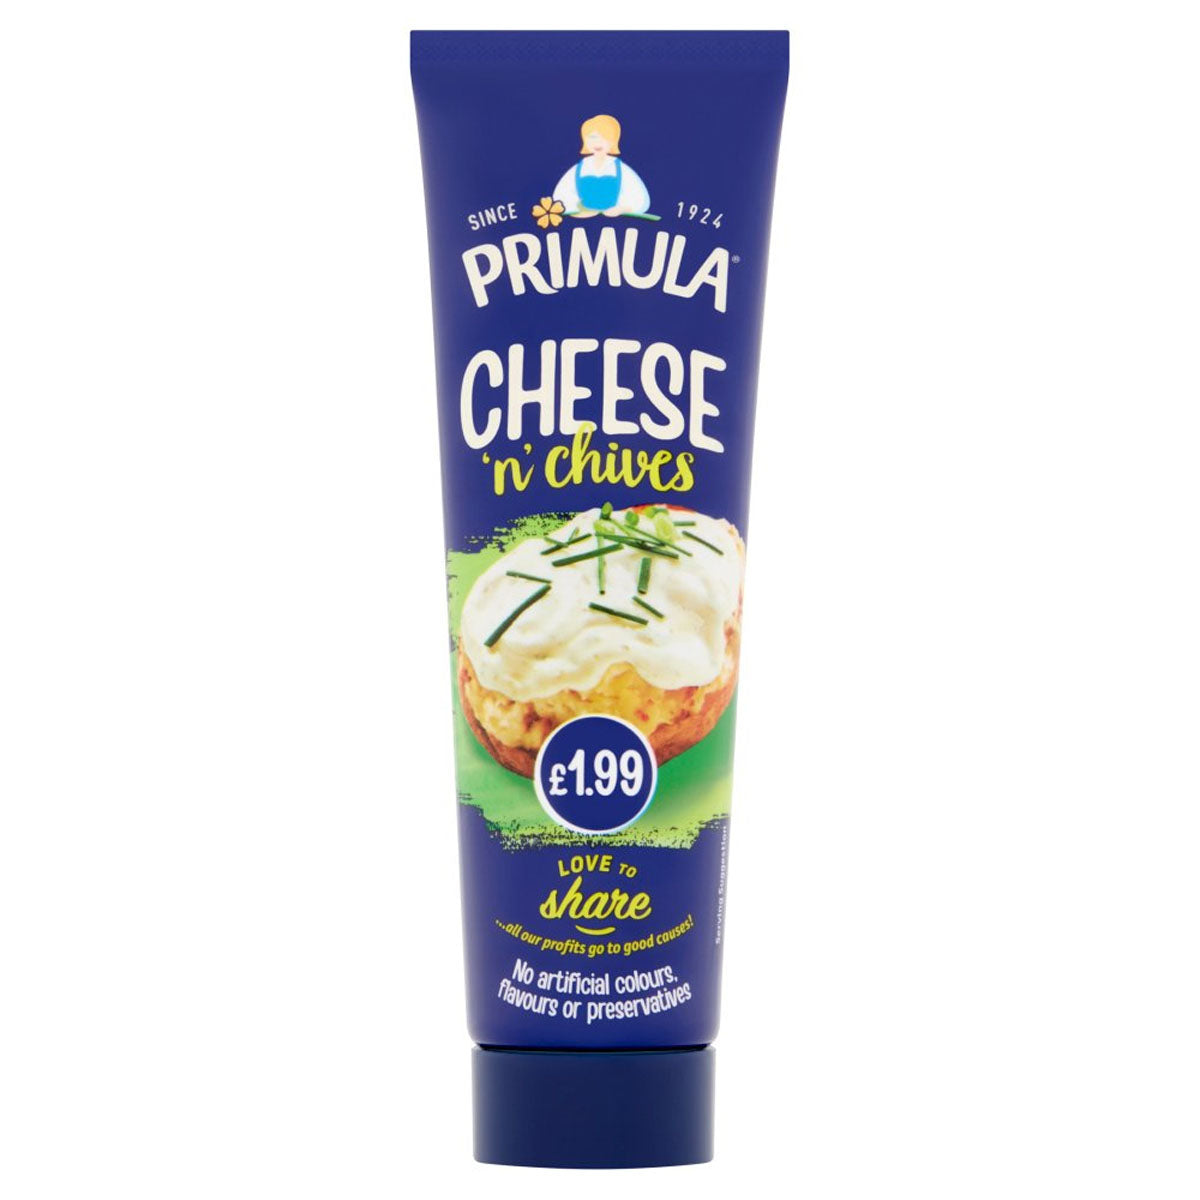 A tube of Primula - Cheese Chives - 140g.